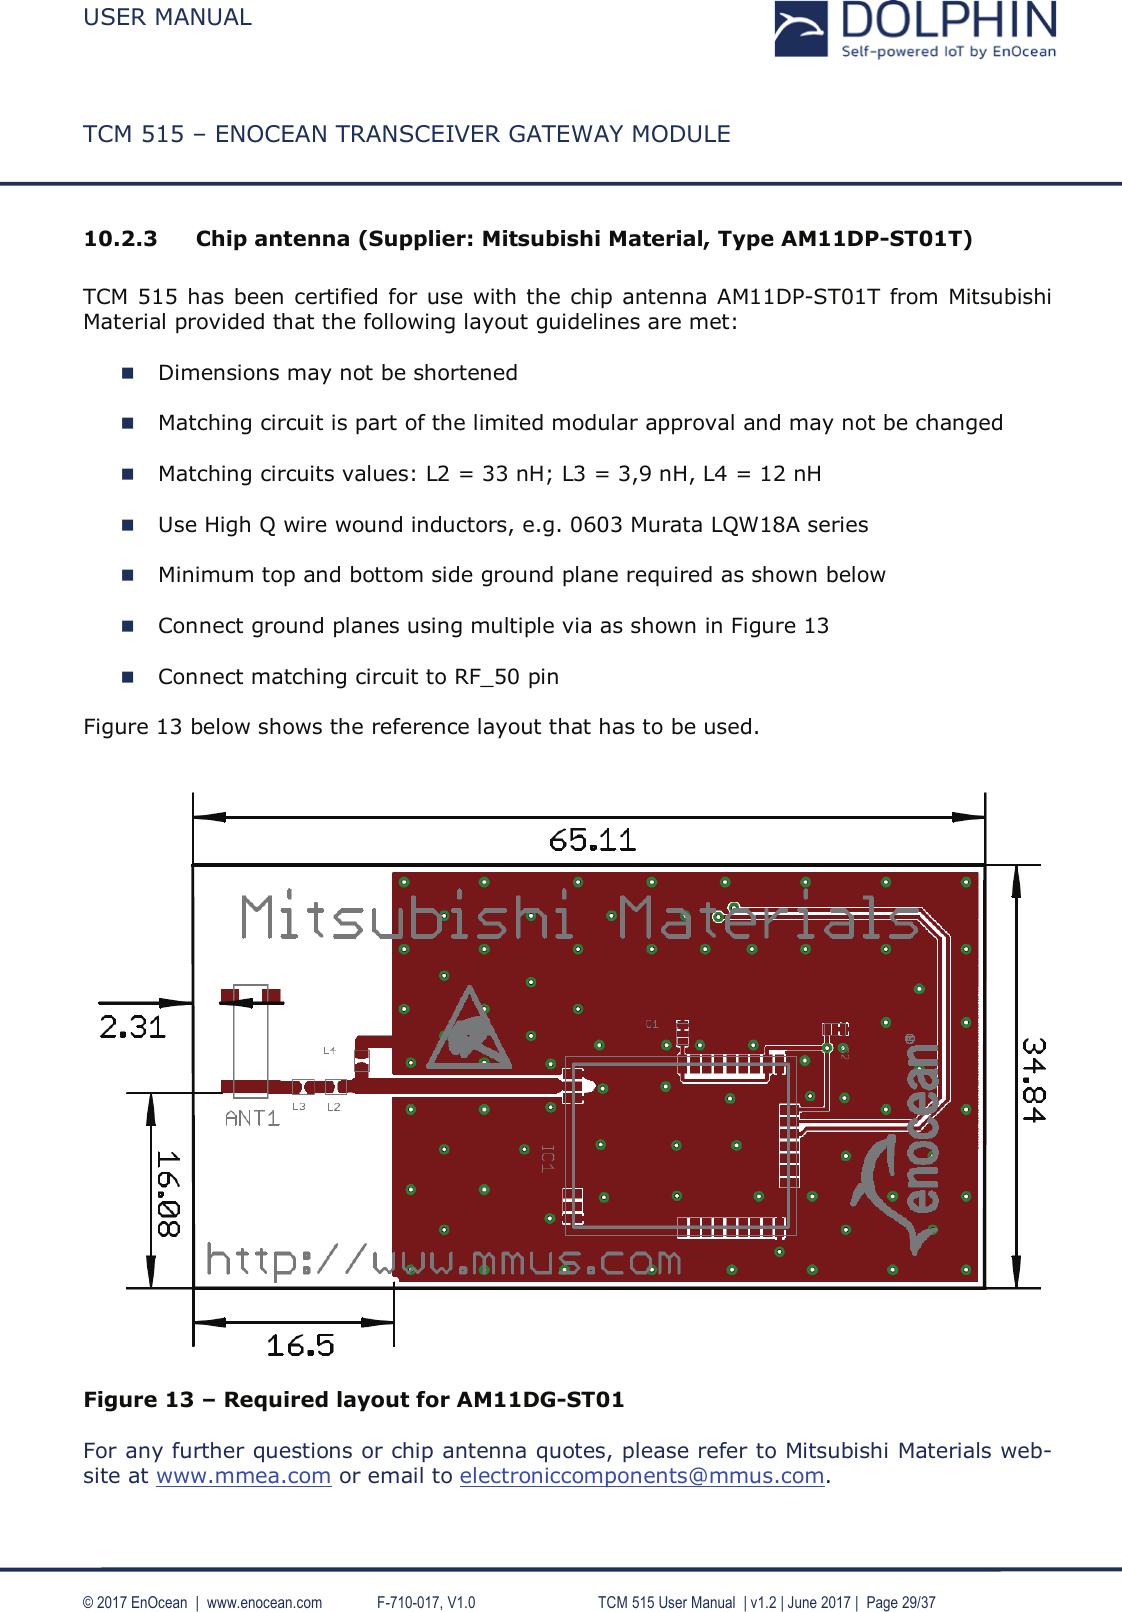 USER MANUALTCM 515 – ENOCEAN TRANSCEIVER GATEWAY MODULE© 2017 EnOcean  |  www.enocean.com F-710-017, V1.0     TCM 515 User Manual | v1.2 | June 2017 | Page 29/3710.2.3 Chip antenna (Supplier: Mitsubishi Material, Type AM11DP-ST01T)TCM 515 has been certified for use with the chip antenna AM11DP-ST01T from Mitsubishi Material provided that the following layout guidelines are met:Dimensions may not be shortenedMatching circuit is part of the limited modular approval and may not be changedMatching circuits values: L2 = 33 nH; L3 = 3,9 nH, L4 = 12 nHUse High Q wire wound inductors, e.g. 0603 Murata LQW18A seriesMinimum top and bottom side ground plane required as shown below Connect ground planes using multiple via as shown in Figure 13Connect matching circuit to RF_50 pinFigure 13 below shows the reference layout that has to be used.Figure 13 – Required layout for AM11DG-ST01For any further questions or chip antenna quotes, please refer to Mitsubishi Materials web-site at www.mmea.com or email to electroniccomponents@mmus.com.